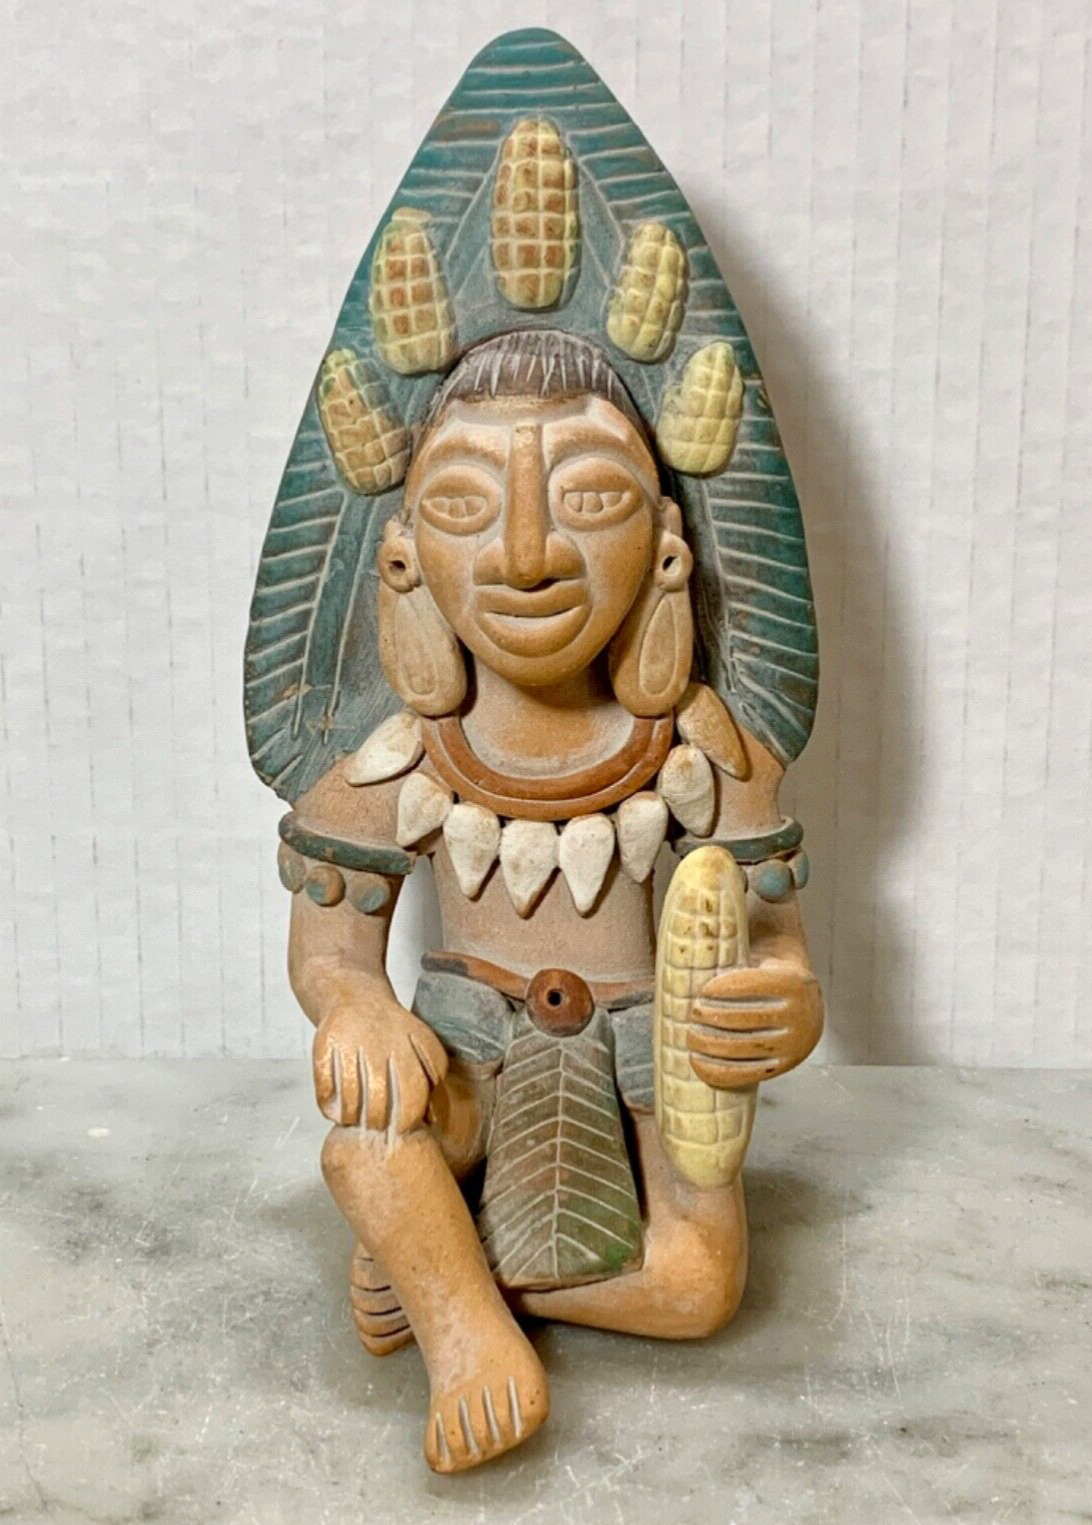 Vintage Mexico Reprod AUT INAD Clay Pottery Statue Mayan Aztec Figure 6.5” tall